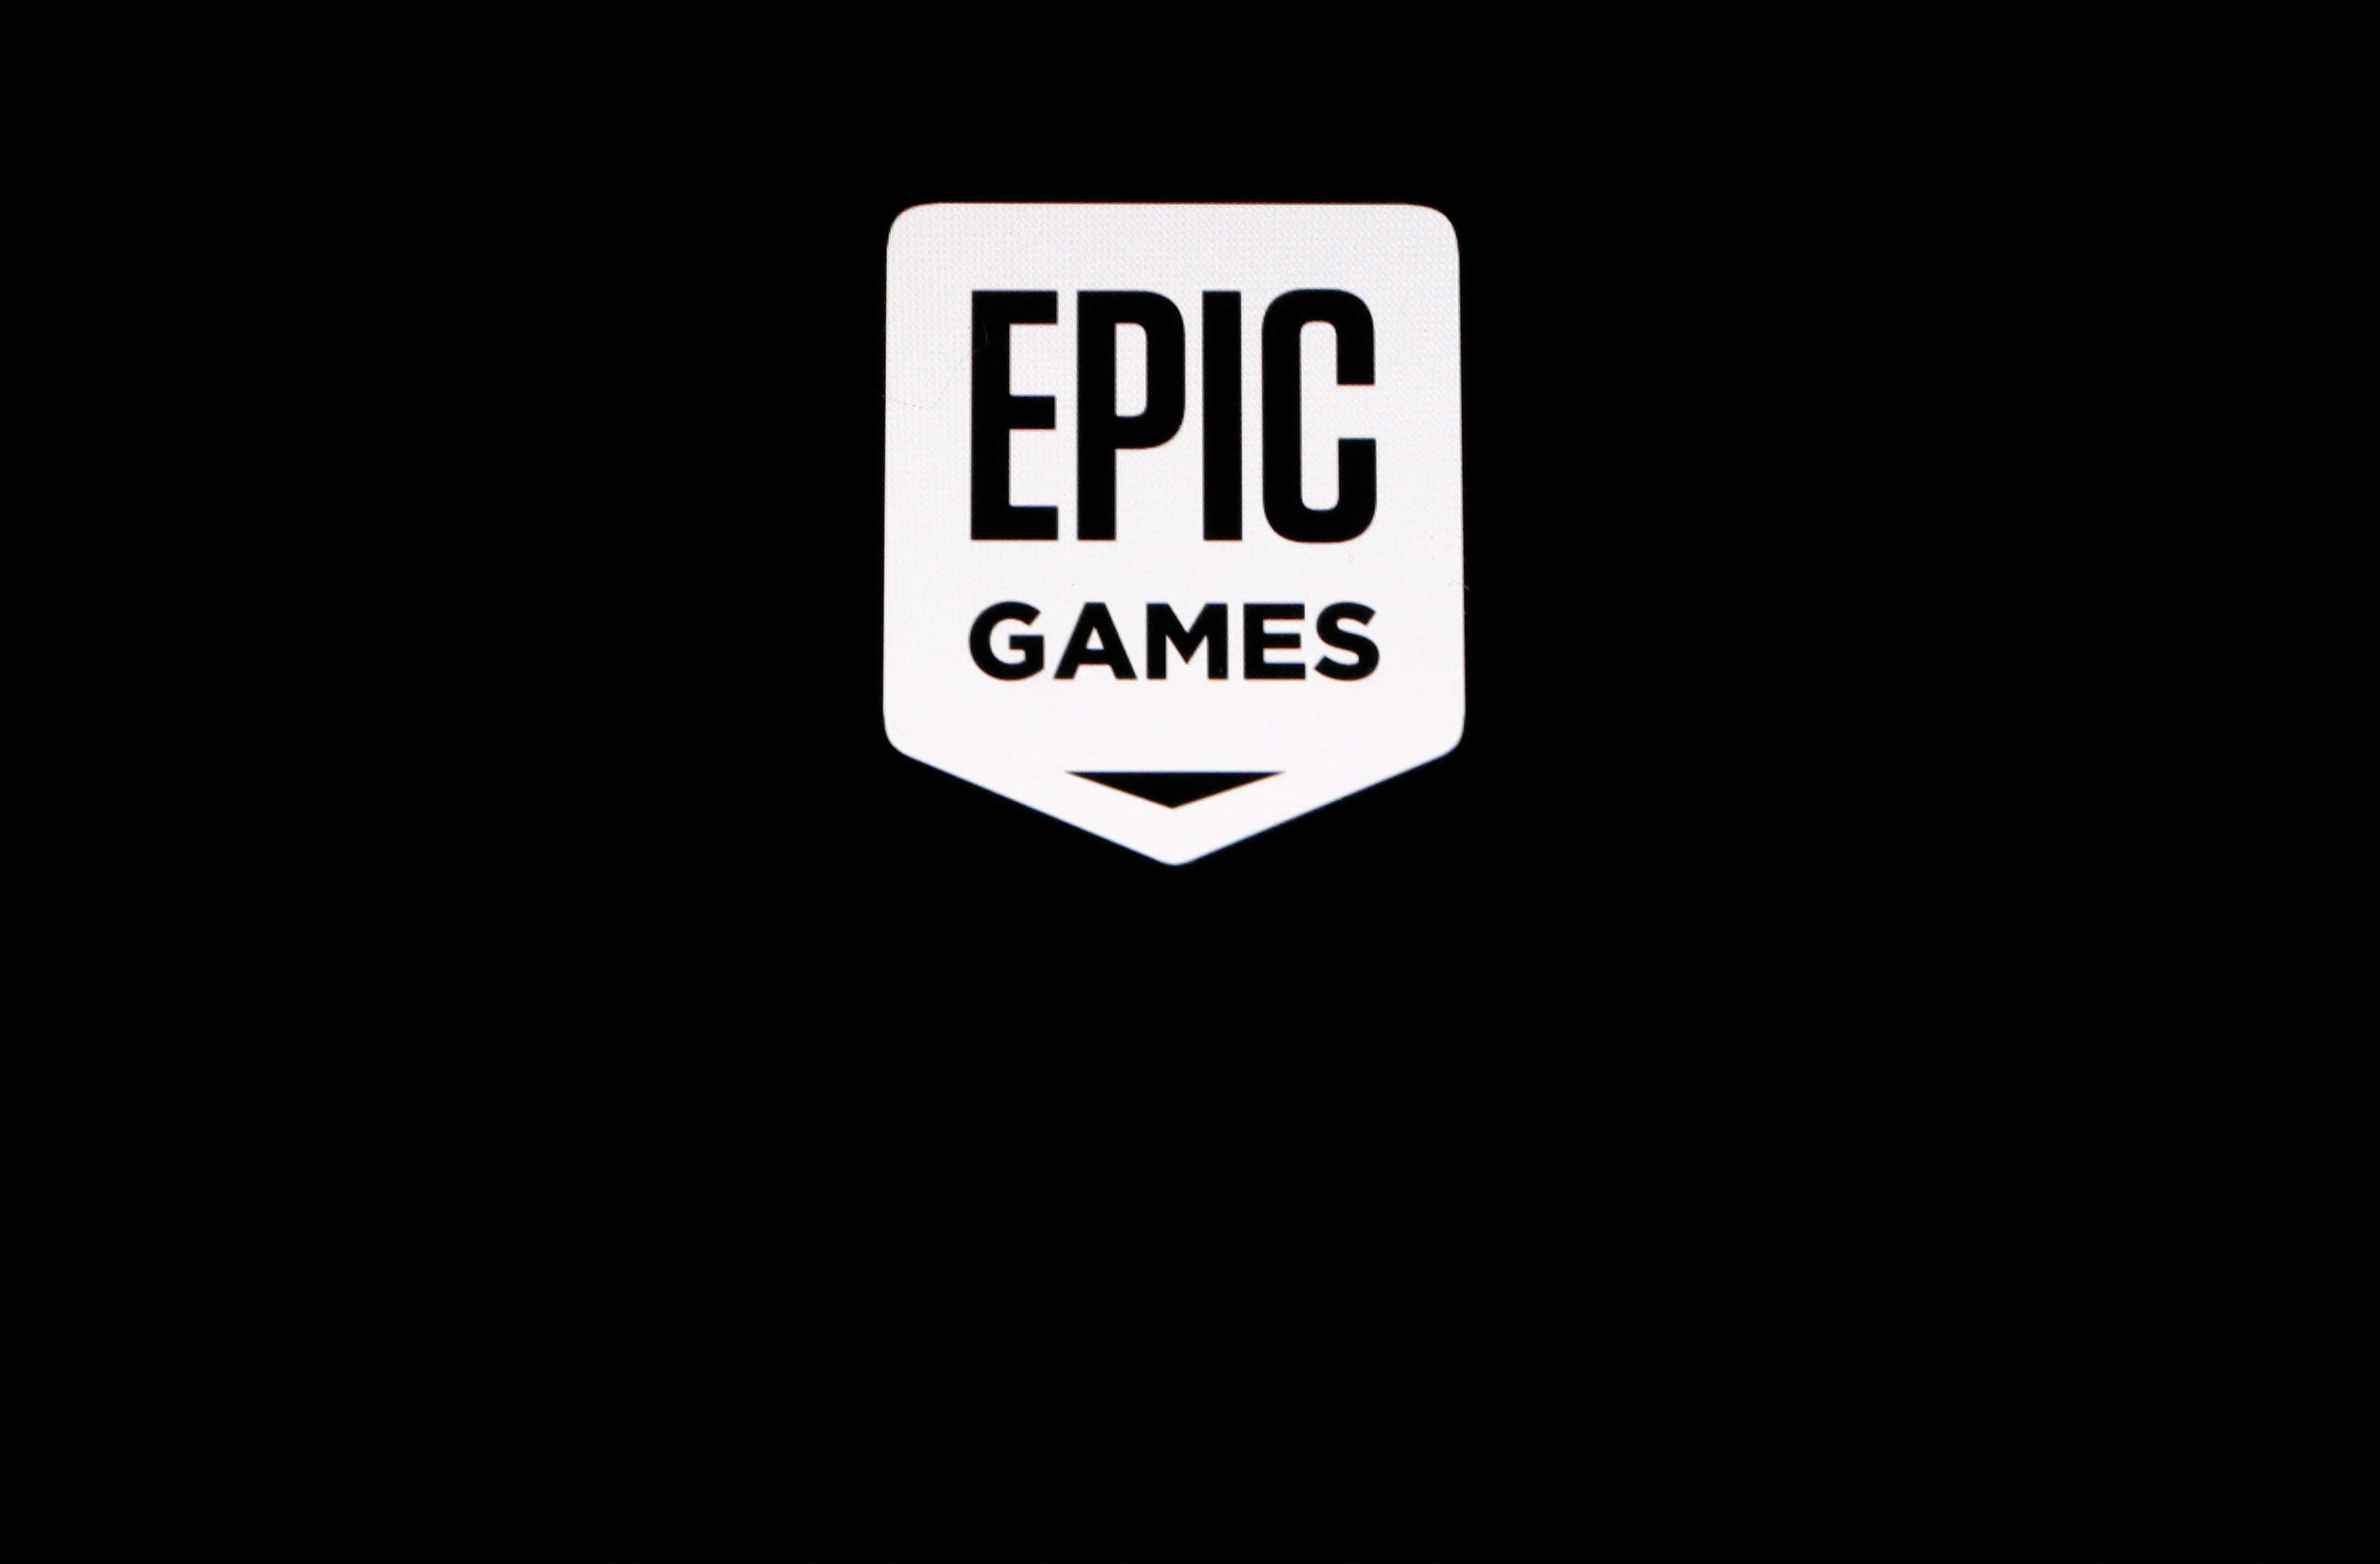 The Epic Games logo, maker of the popular video game 